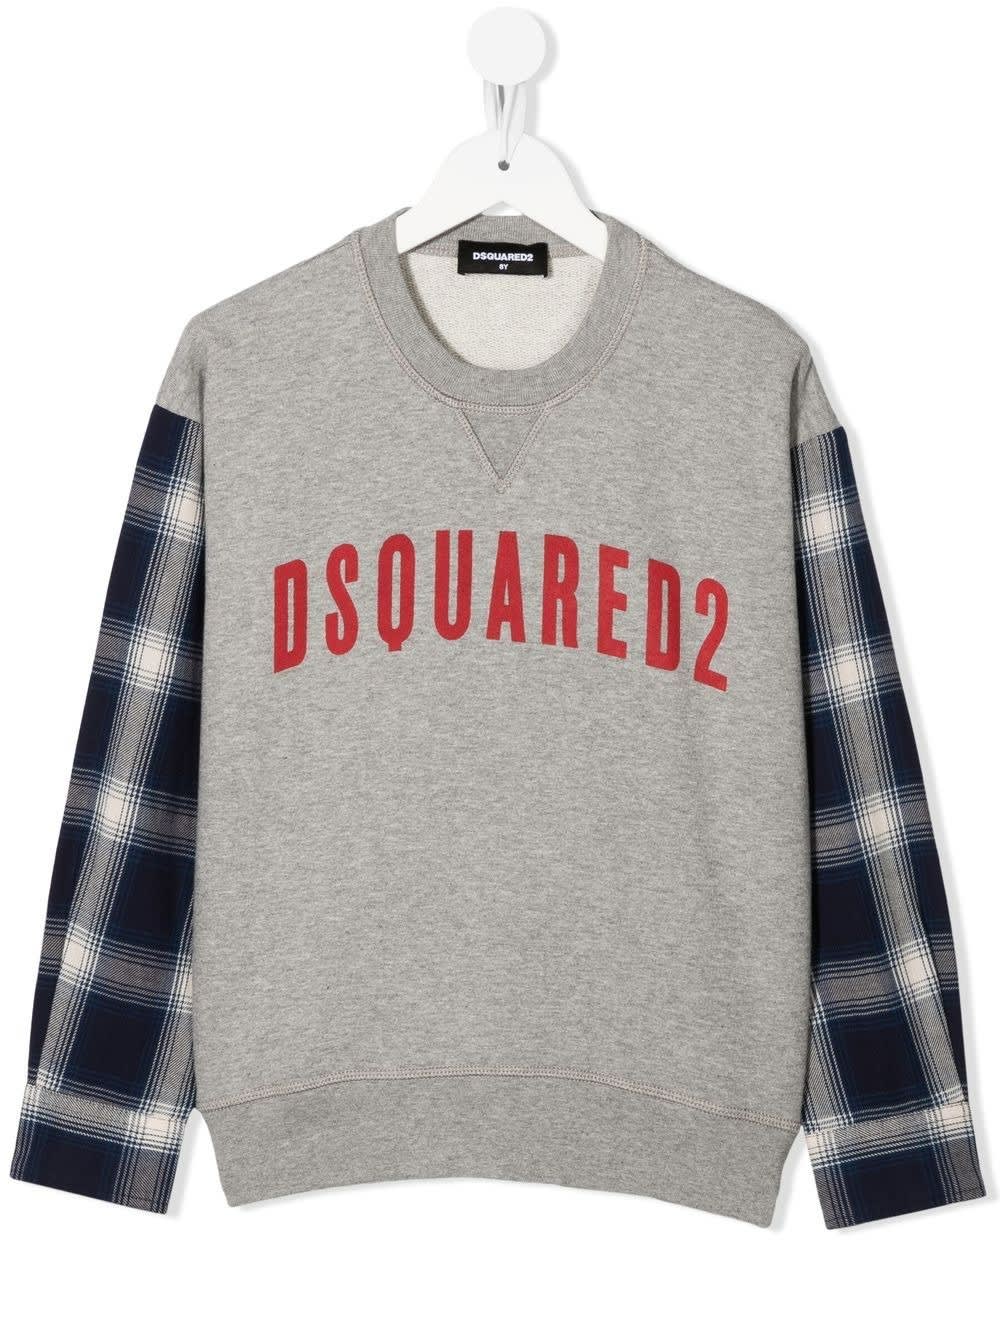 Dsquared2 Kids Grey Sweatshirt With Logo And Check Pattern